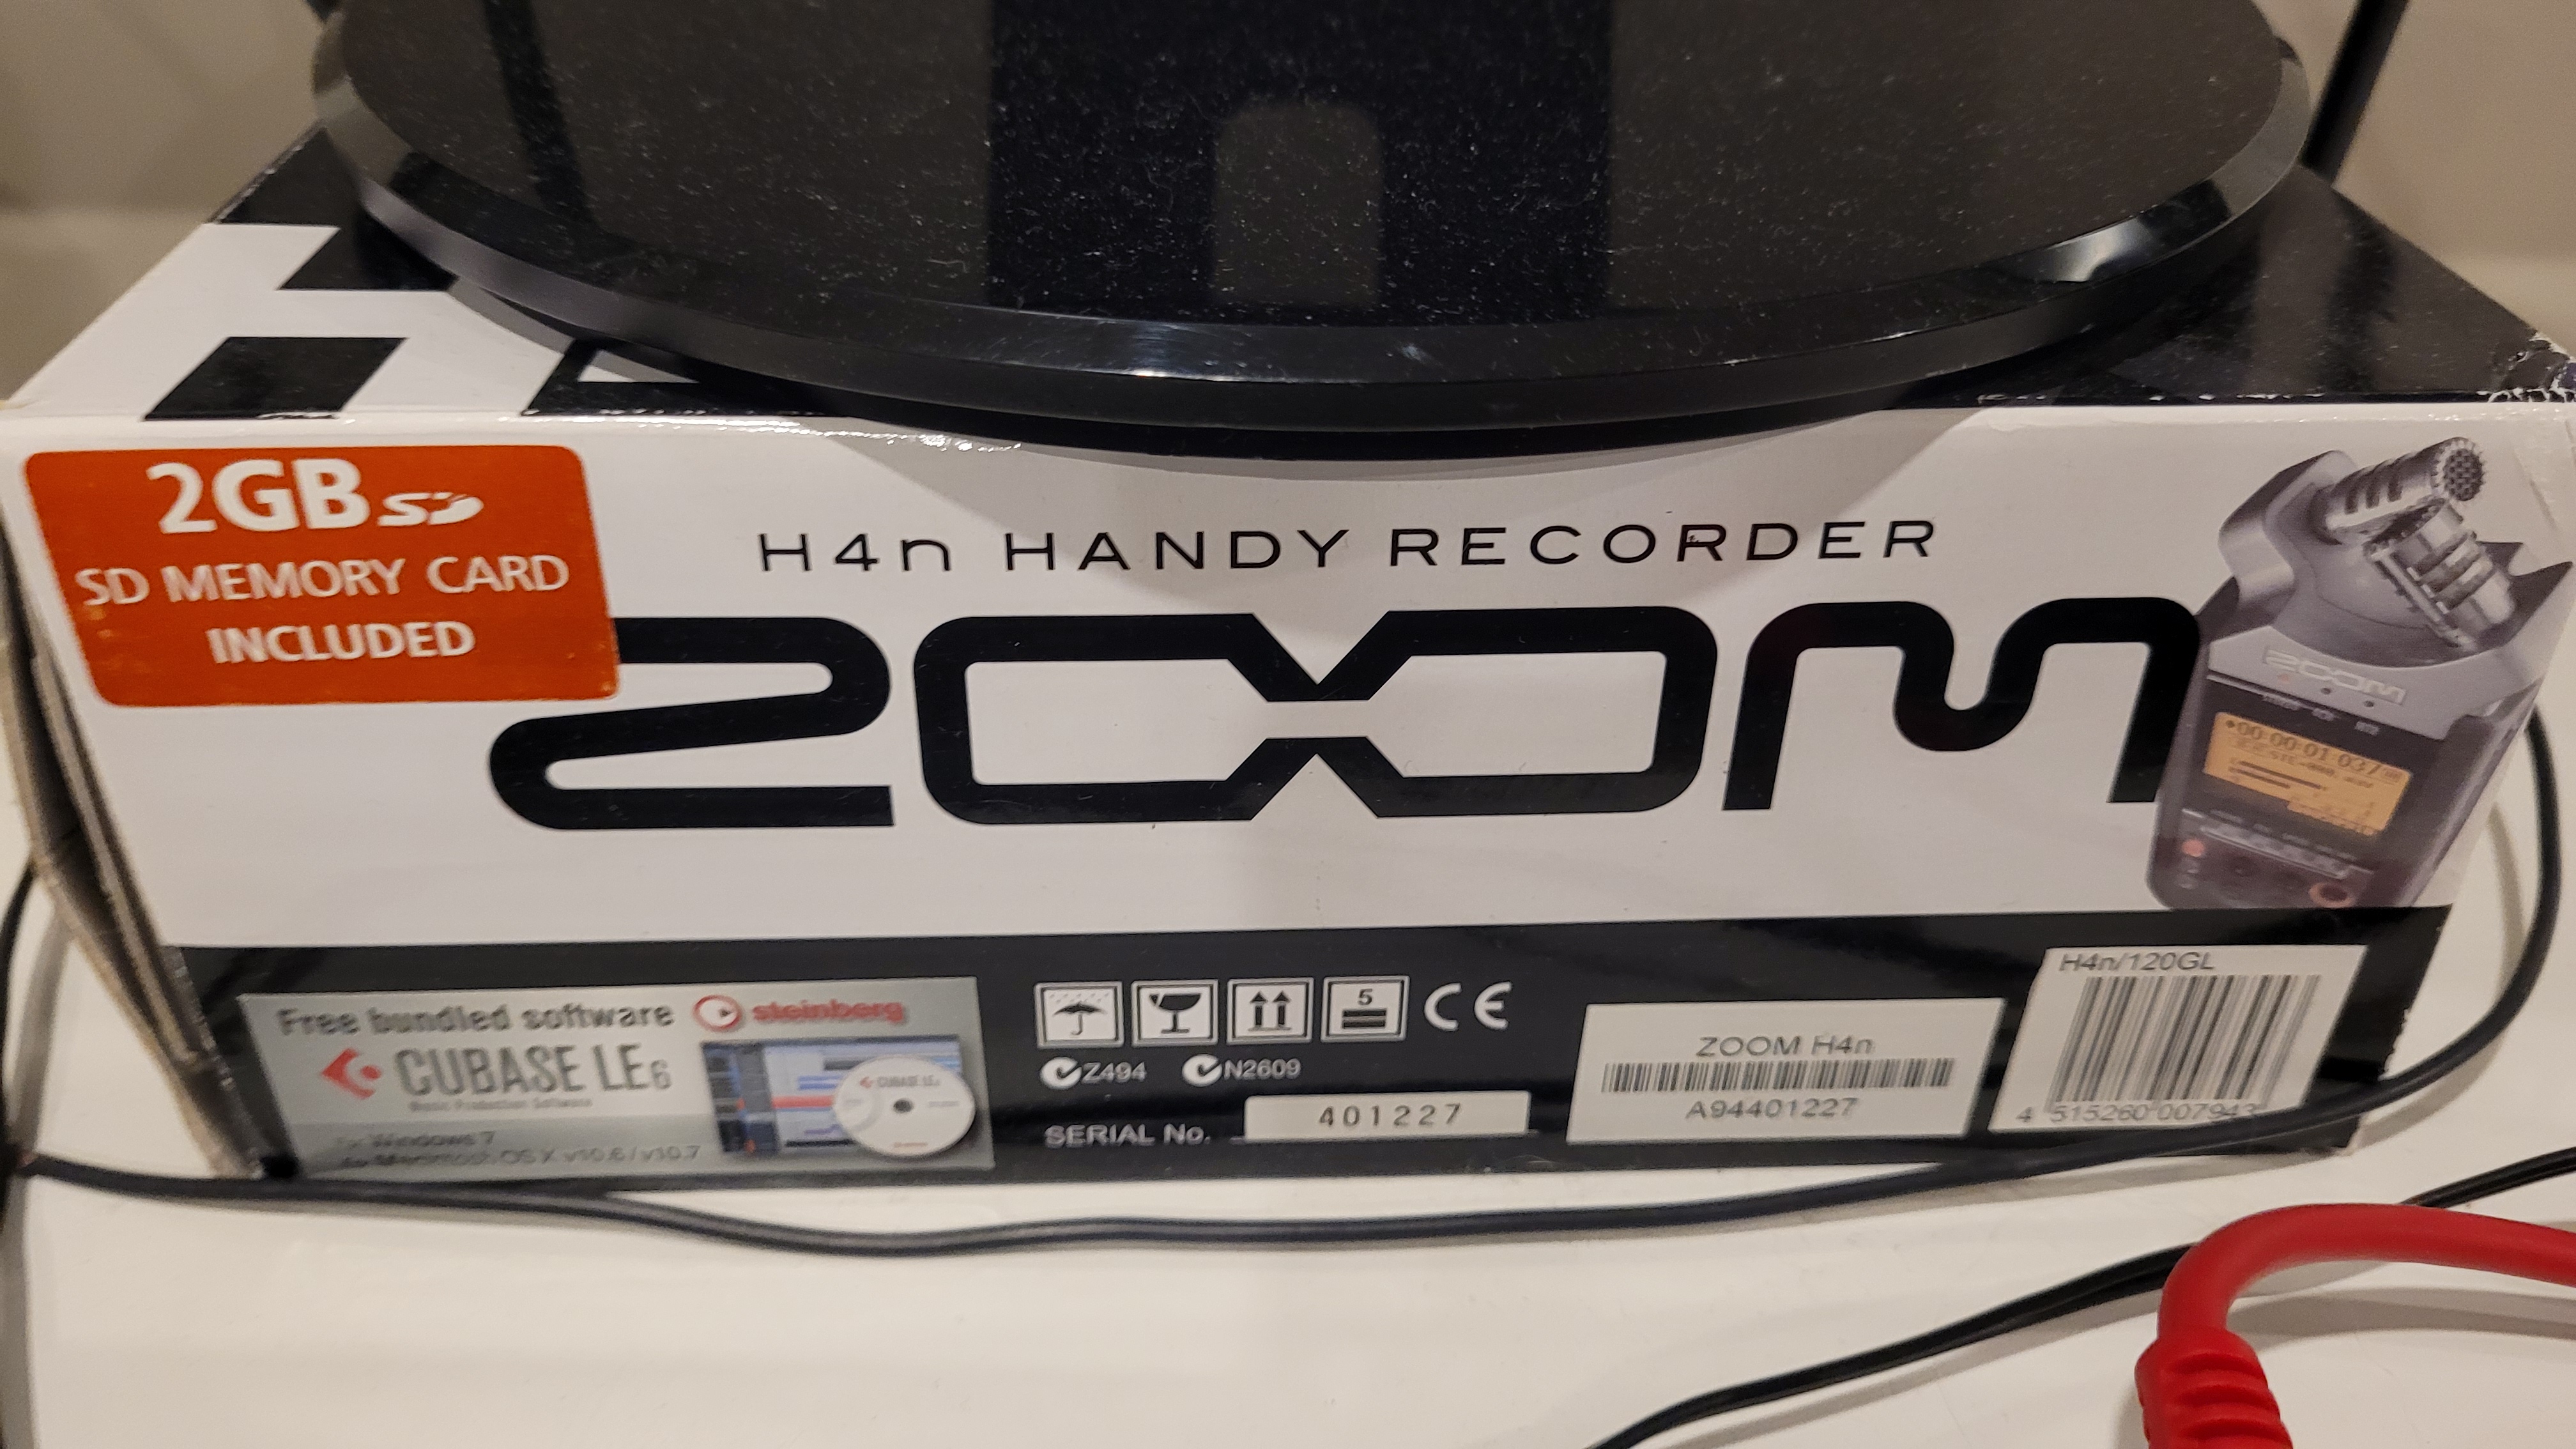 Zoom H4n Handy Recorder box being used as a monitor stand